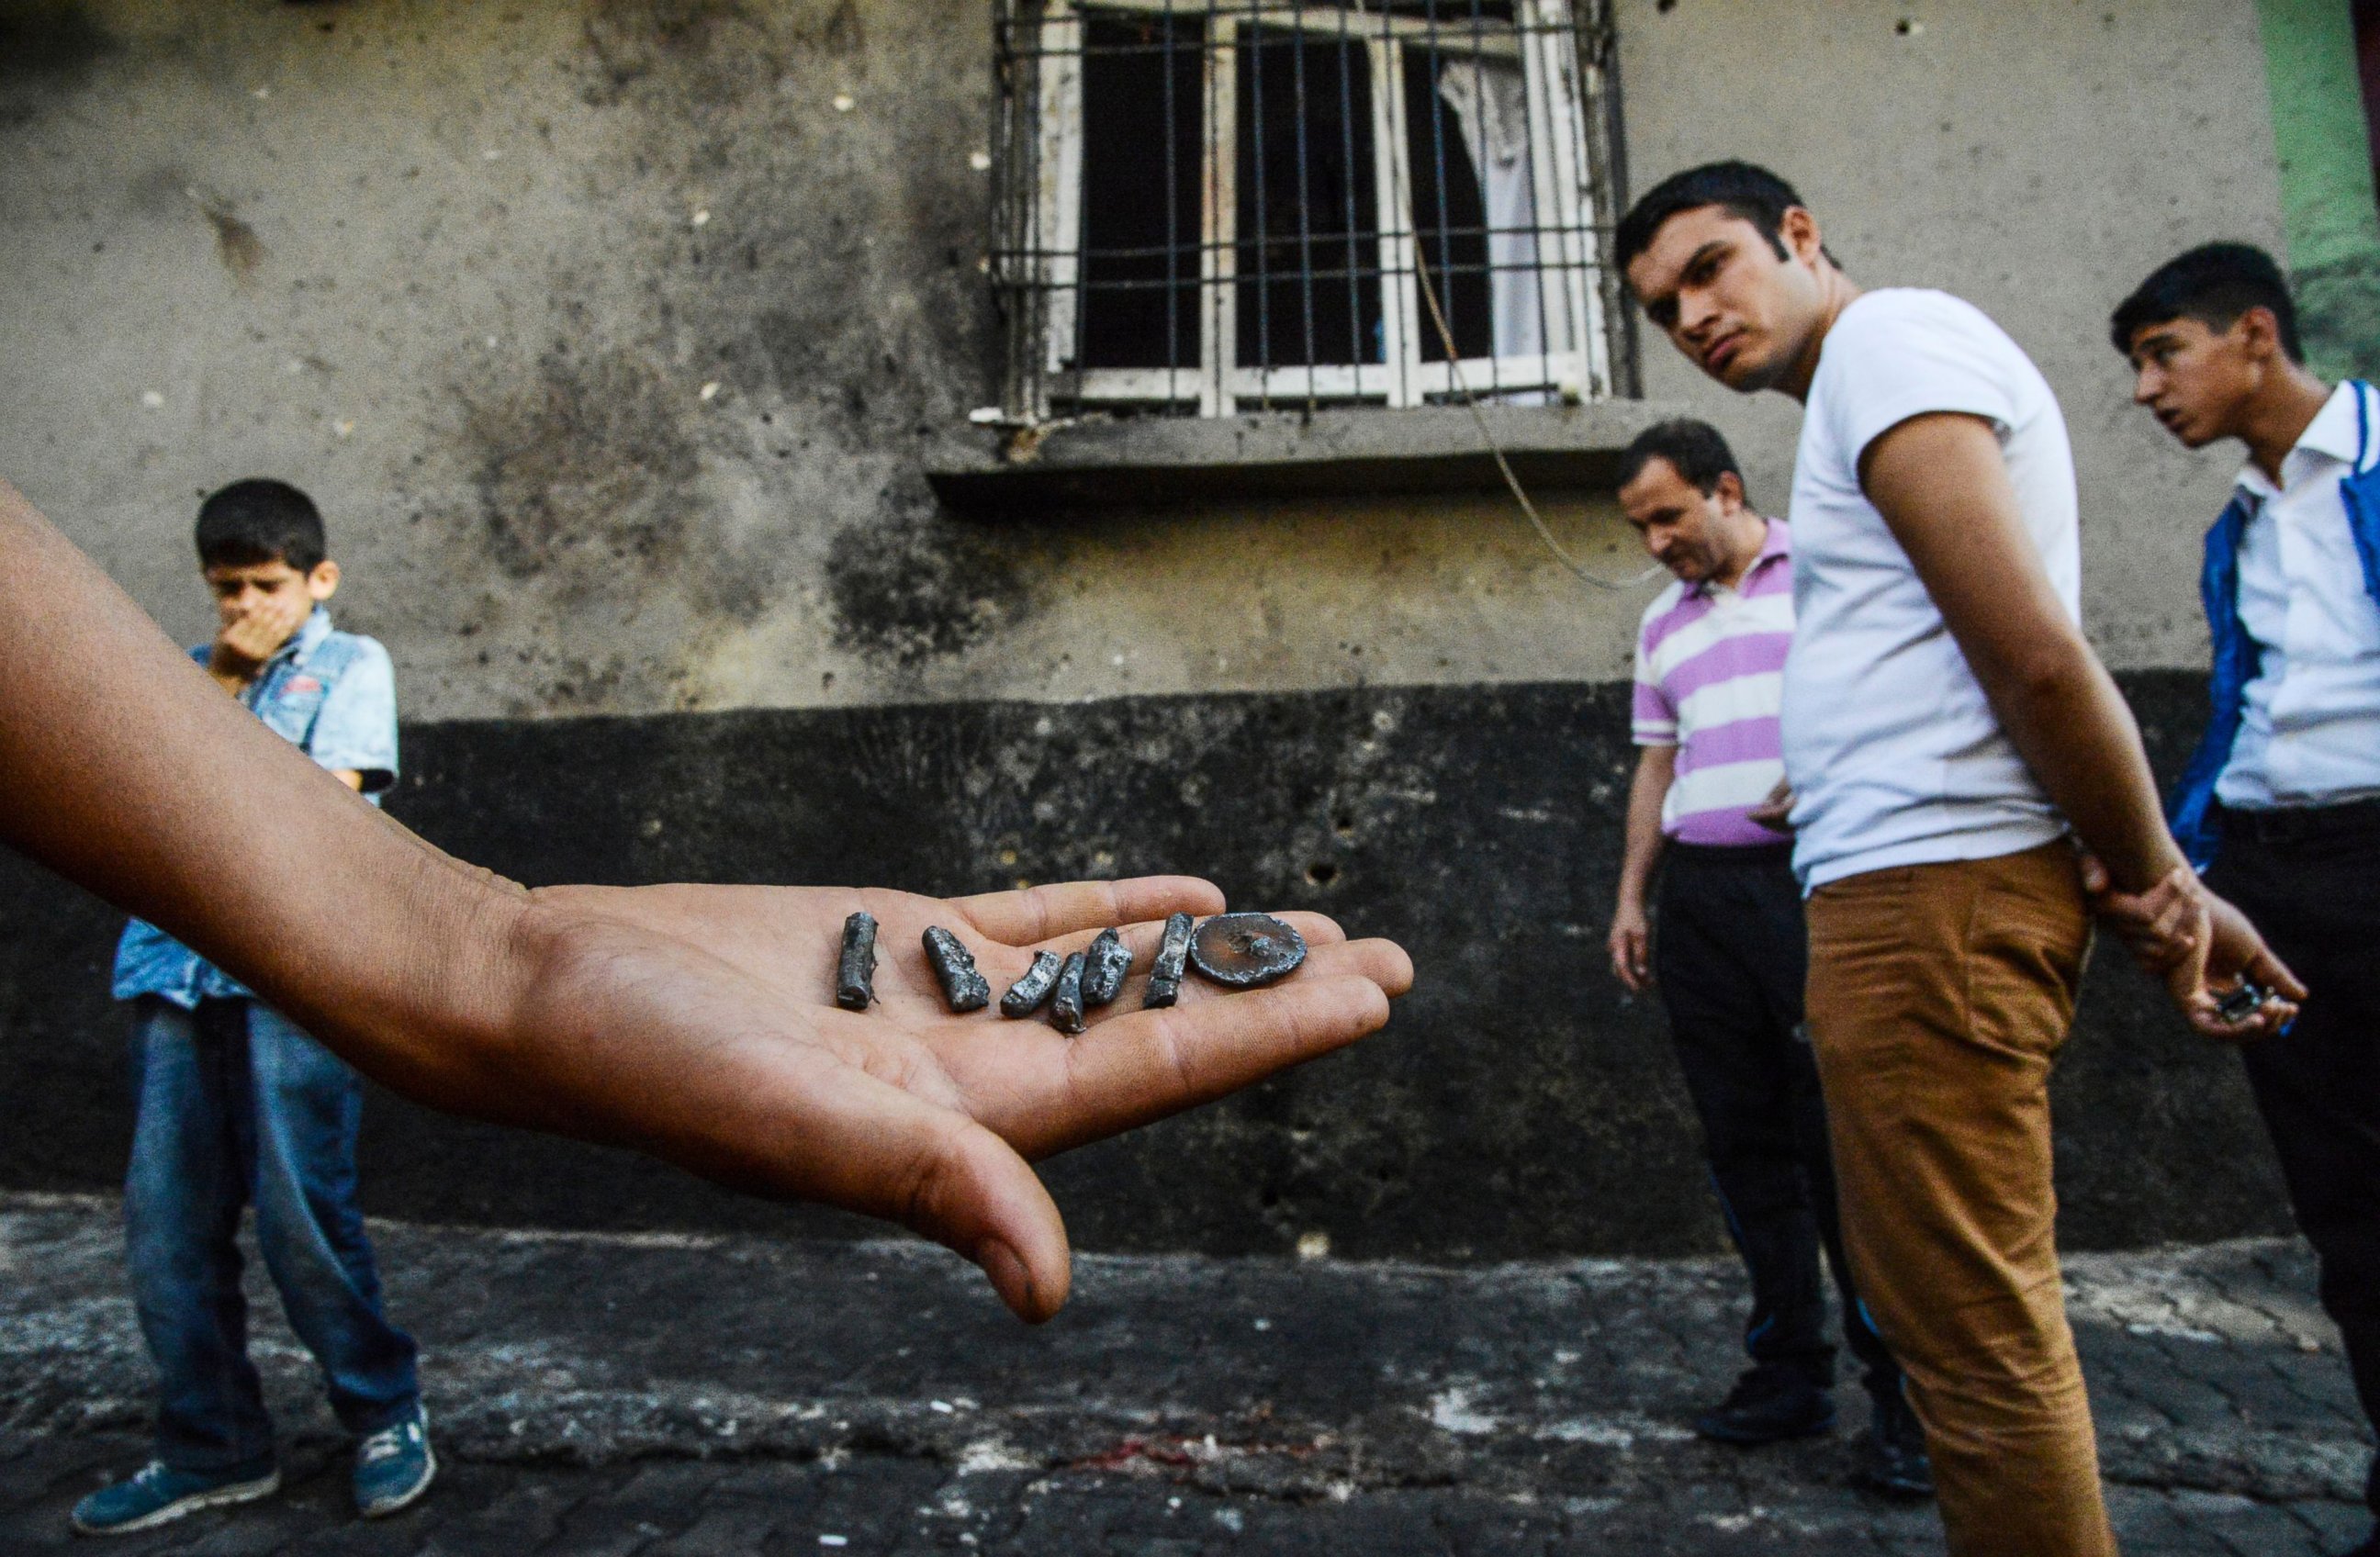 PHOTO: A person shows pieces of projectile near the explosion scene following a late night attack on a wedding party that left at least 30 dead in Gaziantep in southeastern Turkey near the Syrian border, Aug. 21, 2016. 
